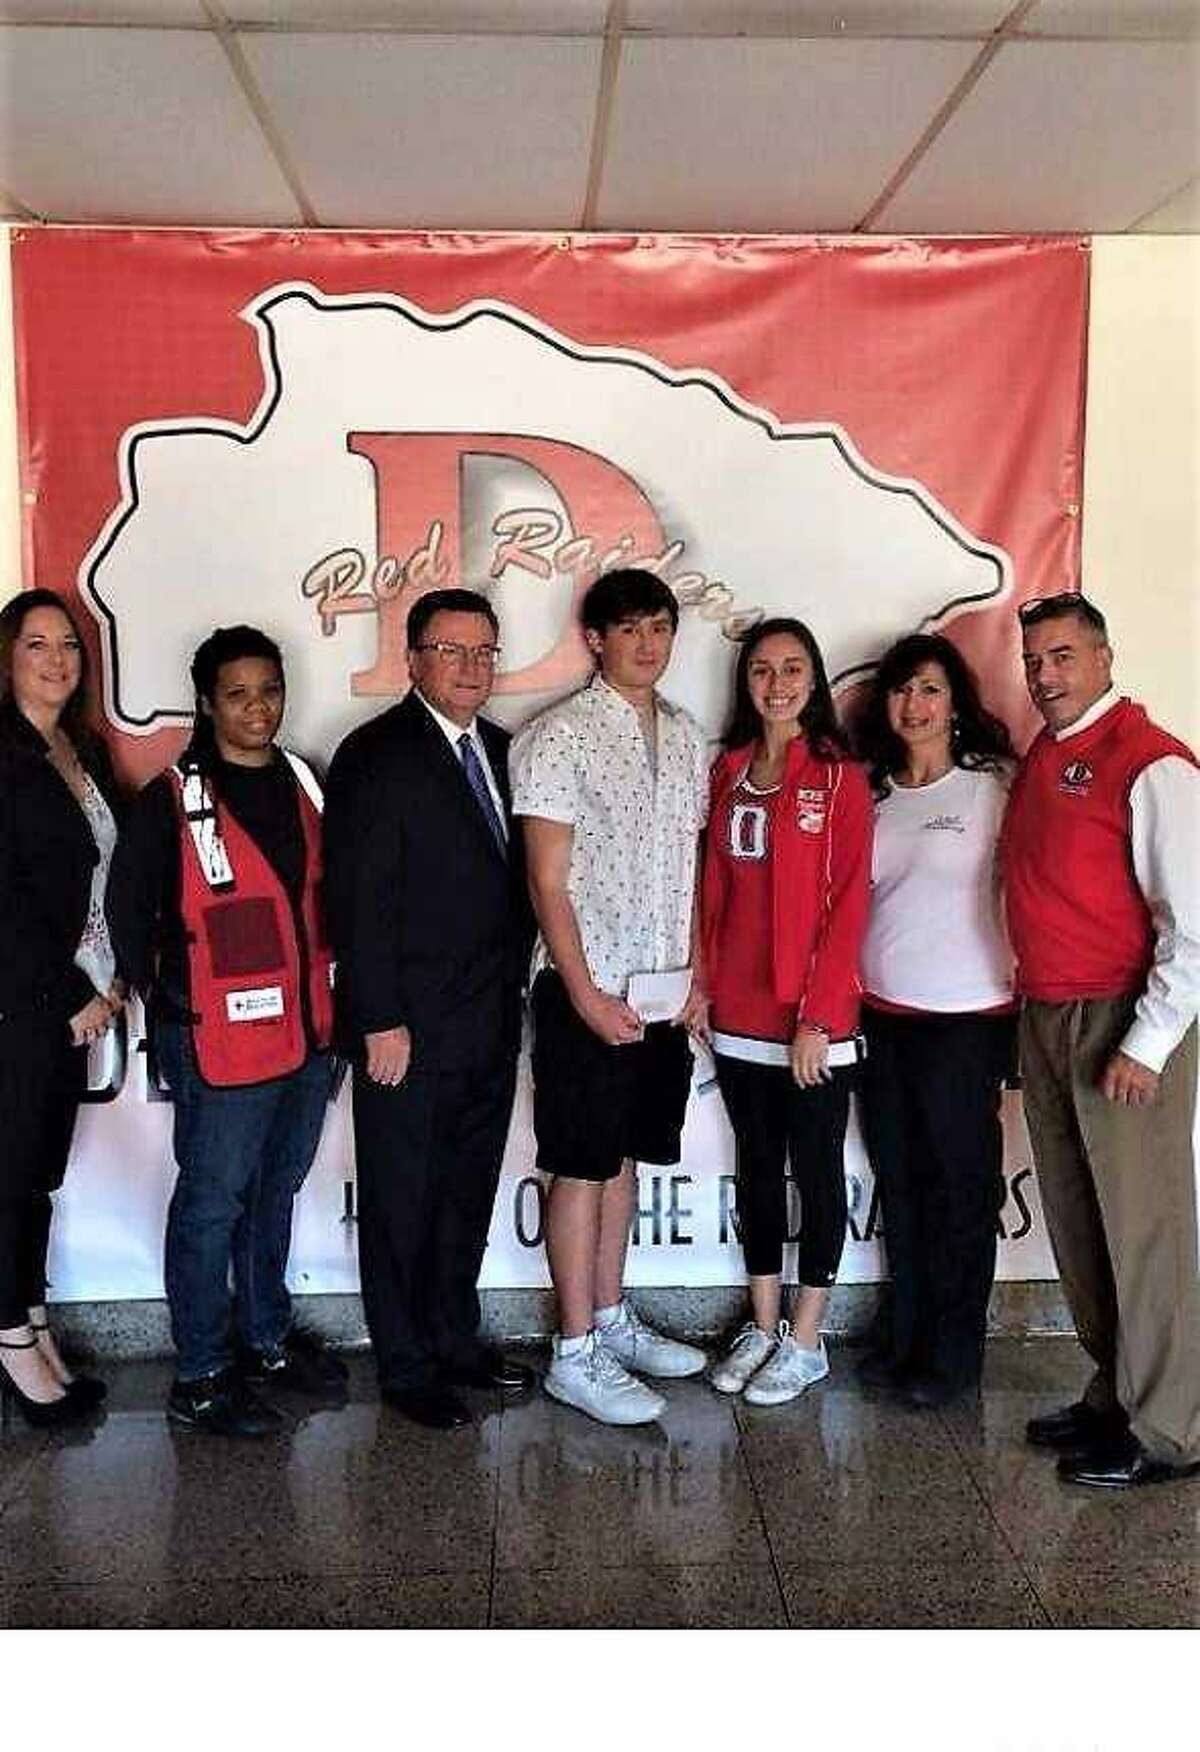 From left, Teri Pough, of CironeFriedberg, LLP, Sharon Escoffery, Red Cross volunteer, William H. VanAlstyne, of CironeFriedberg, LLP, DHS student Chase Boulton, DHS student Victoria Ramirez, Maria Bellone-Lajeunesse, owner of Maria's Hair Gallery and Derby Superintendent of Schools Matthew Conway